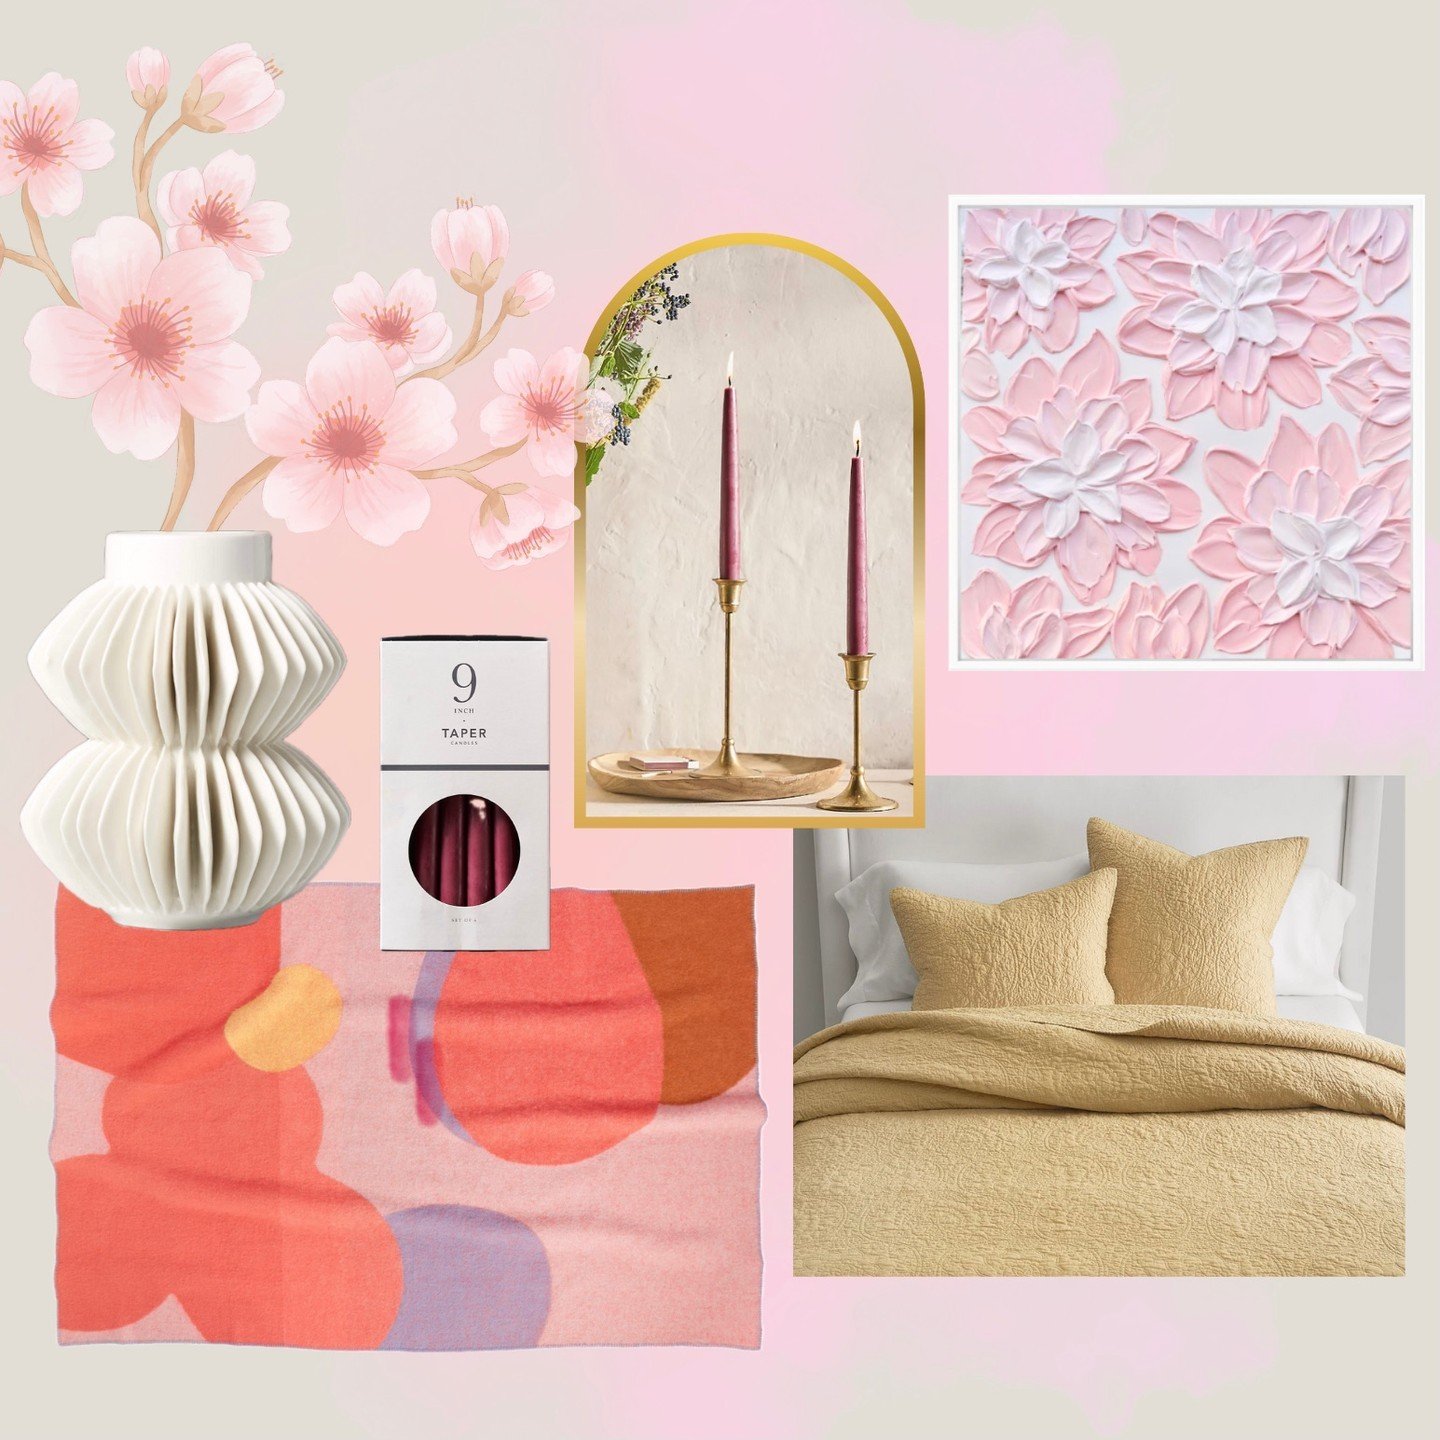 🌸 Spring is in the air! Add florals to your home beyond fresh cut flowers in a vase - Add texture and pastel-infused color throughout your home with bedding, throw blankets, art and accessories.

Looking for more home decor tips, tricks and inspirat